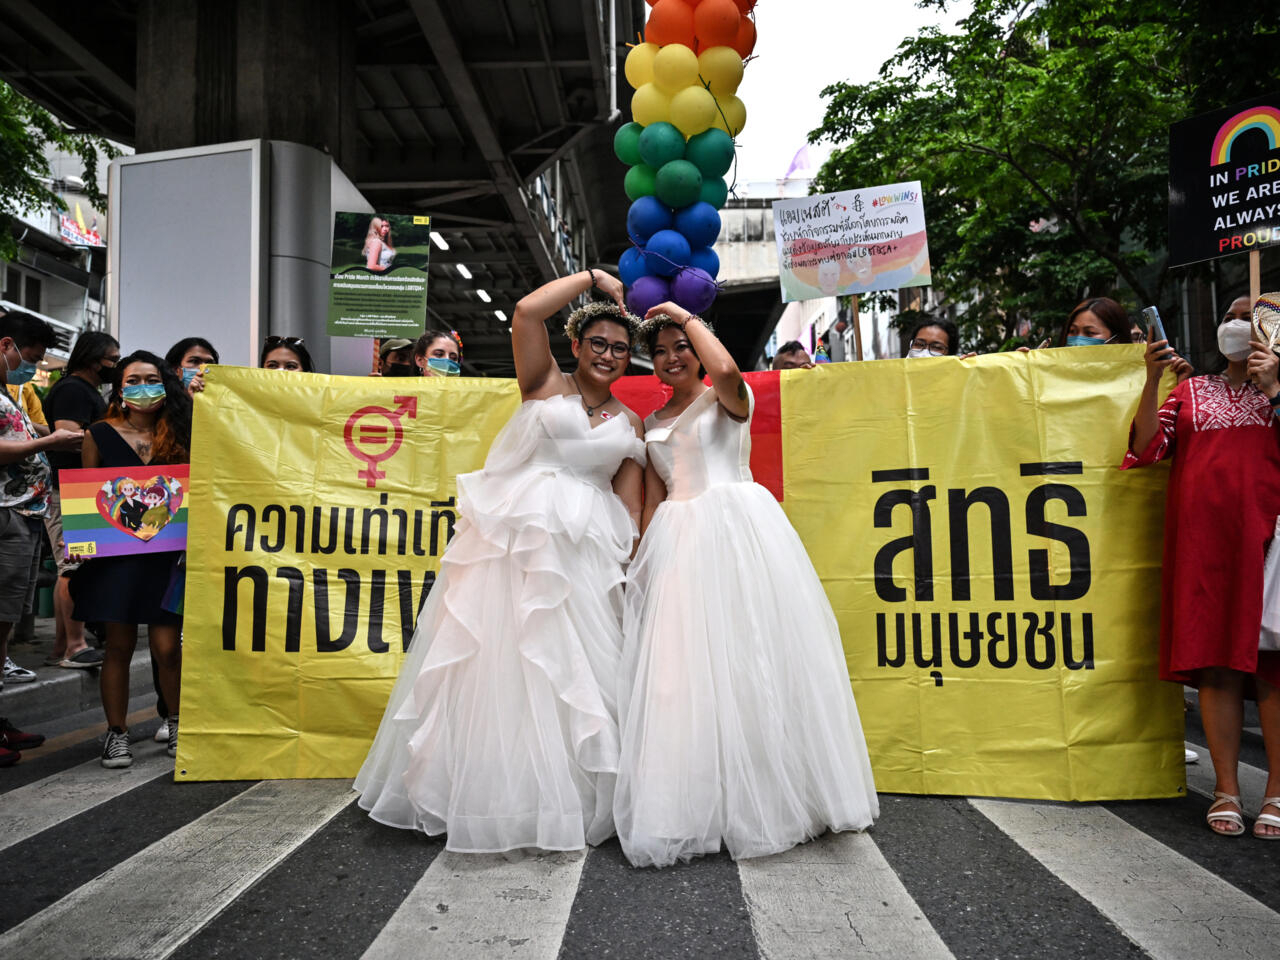 Thailand Approves Same-Sex Marriage in Historic Legislation